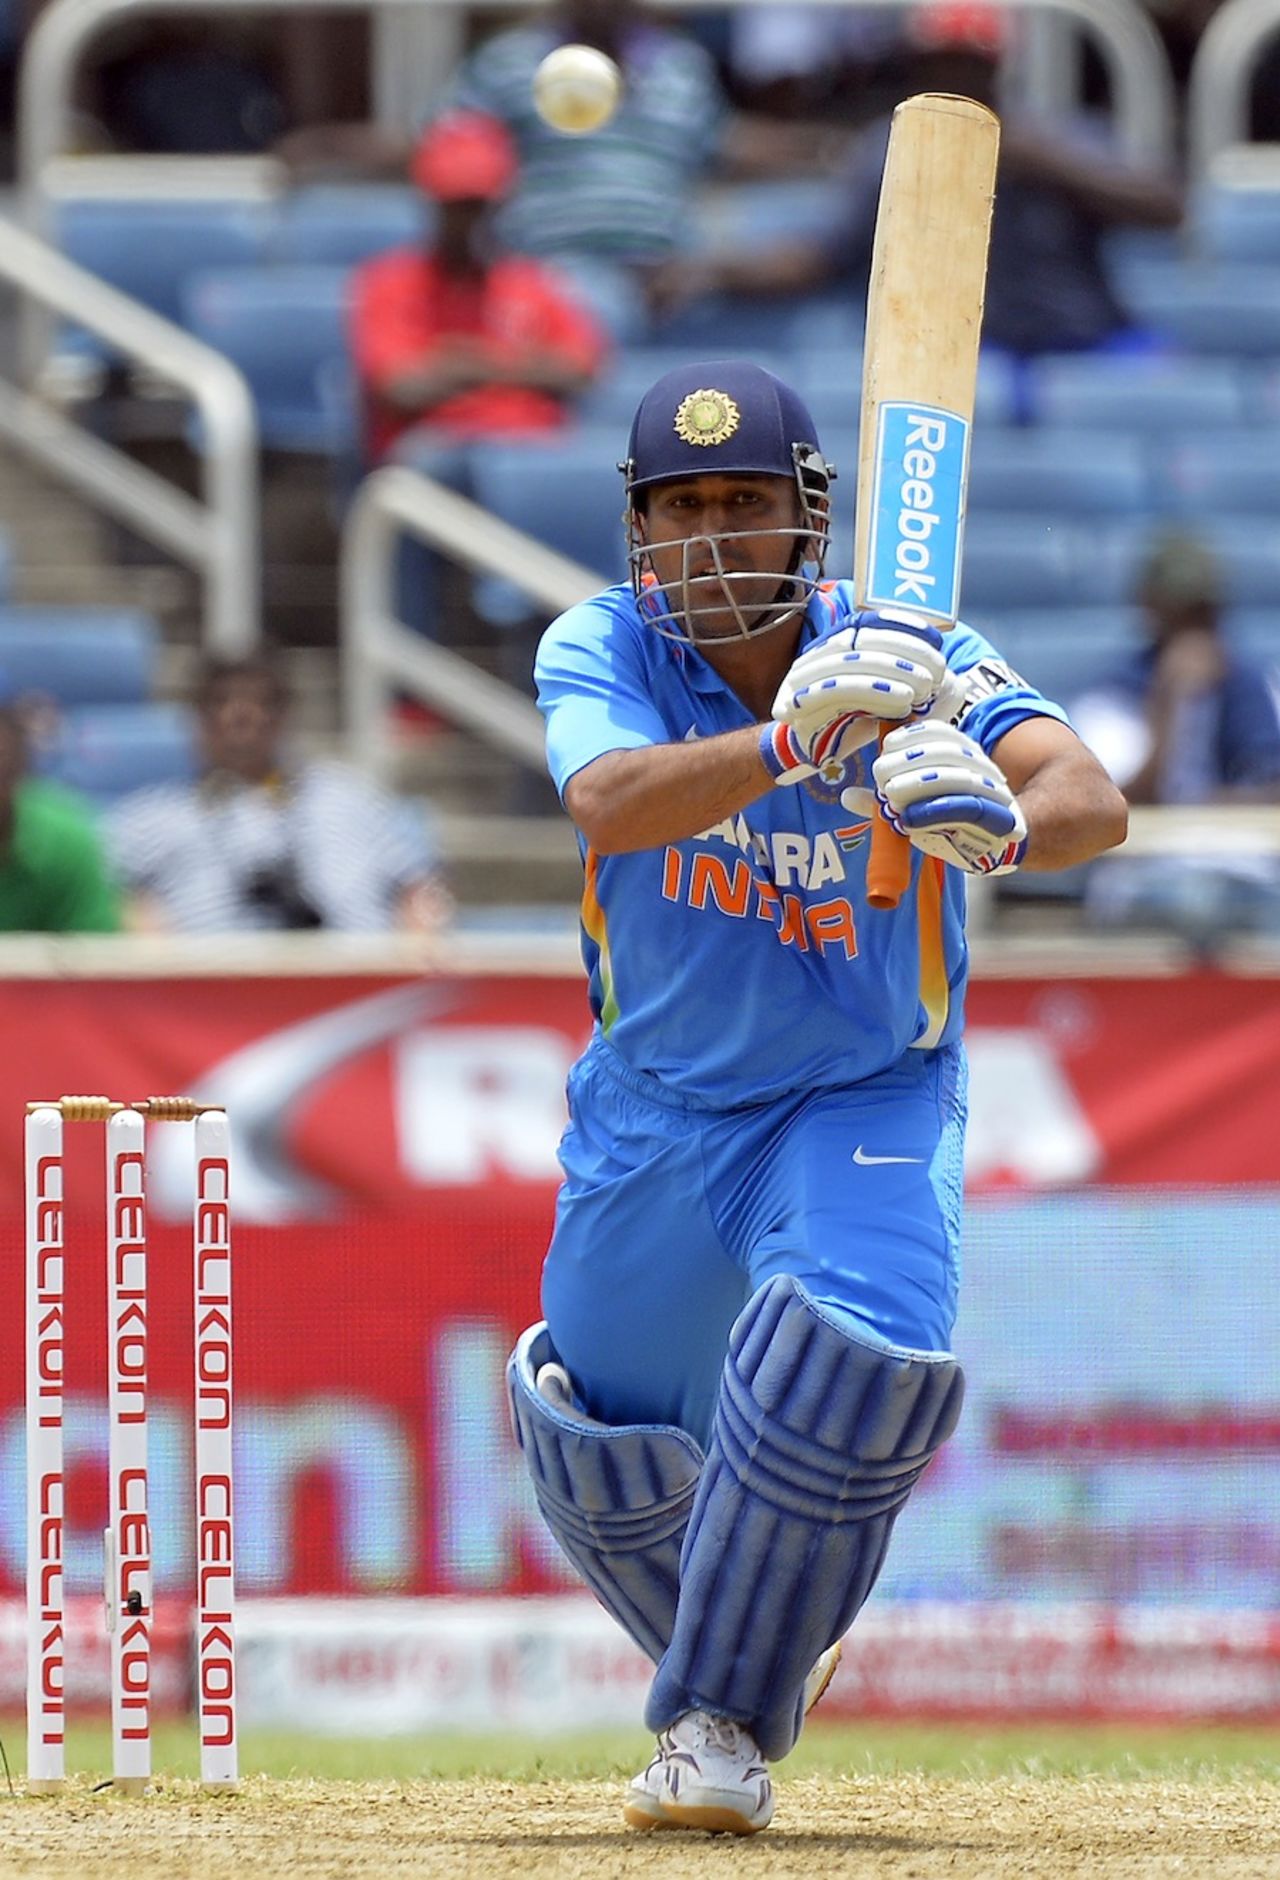 MS Dhoni hits one back, West Indies v India, West Indies tri-series, Kingston, June 30, 2013